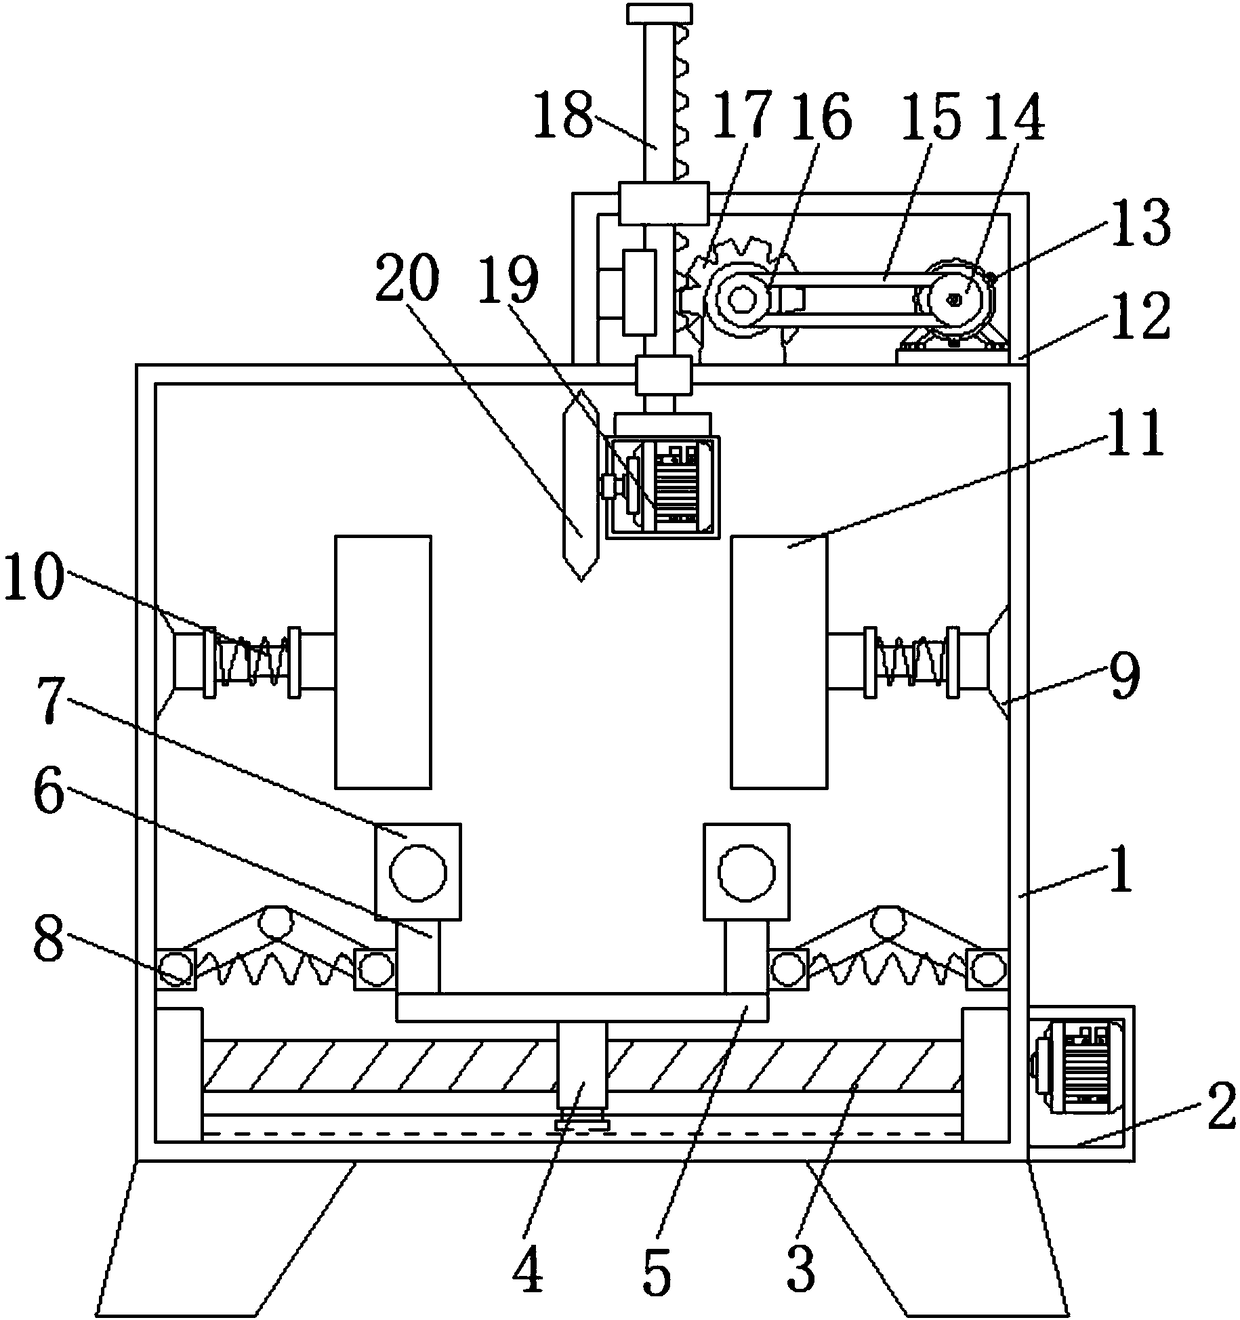 Adjustable panel cutting device for building construction